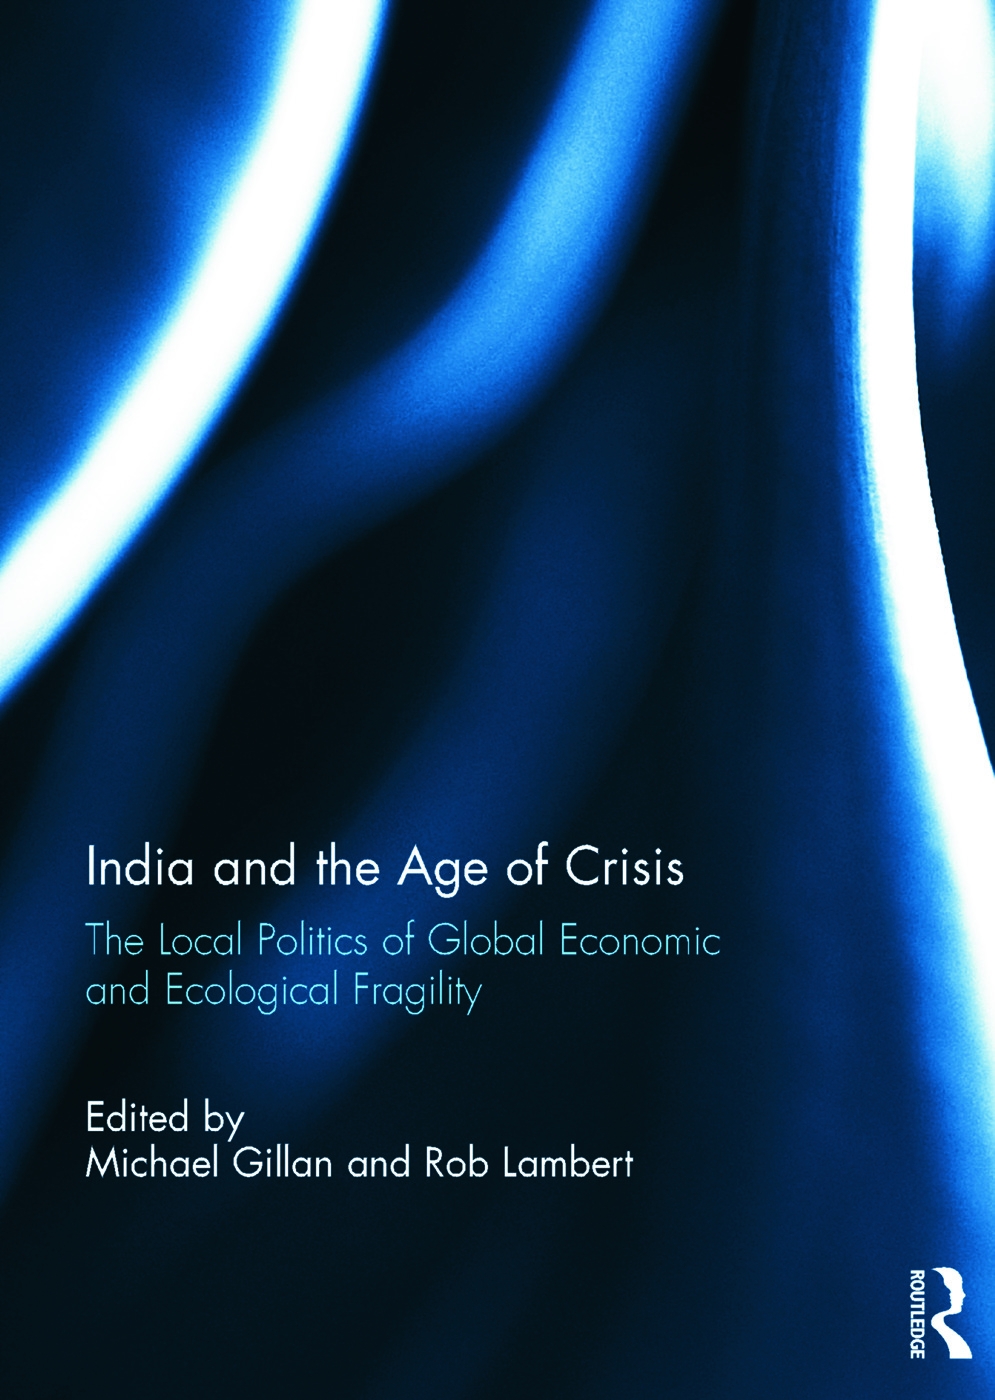 India and the Age of Crisis: The Local Politics of Global Economic and Ecological Fragility